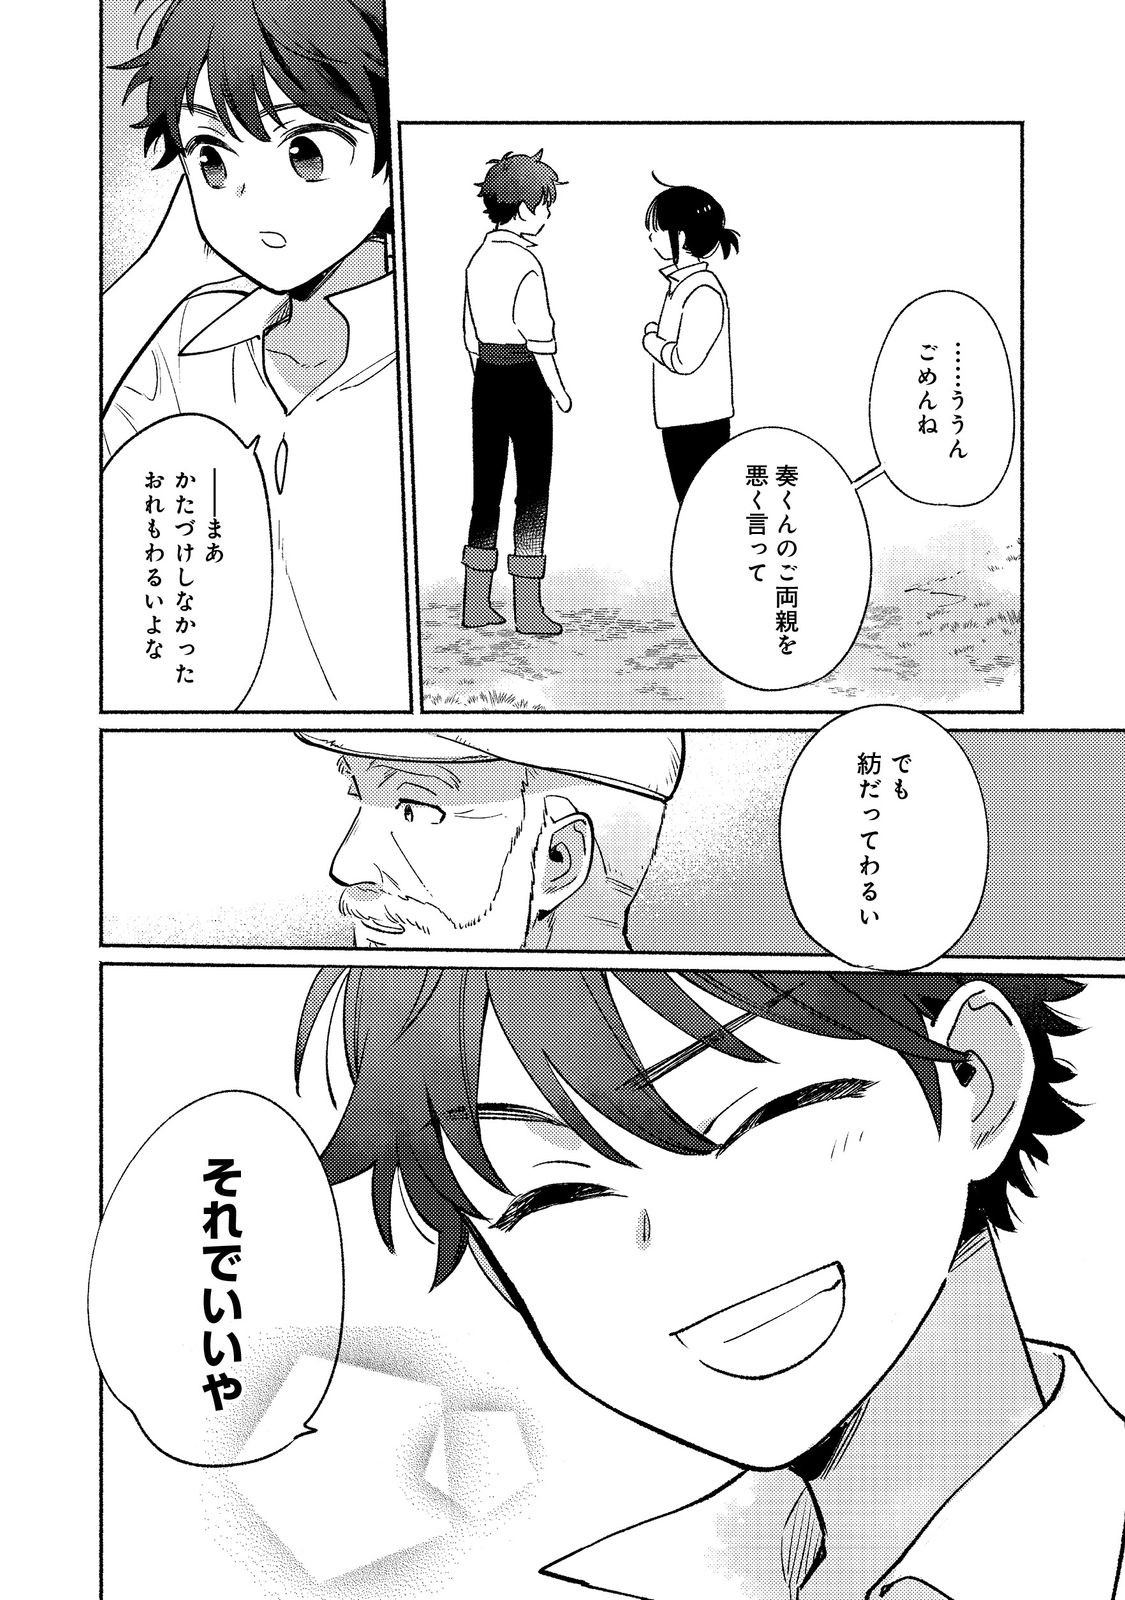 I’m the White Pig Nobleman 第18.2話 - Page 3